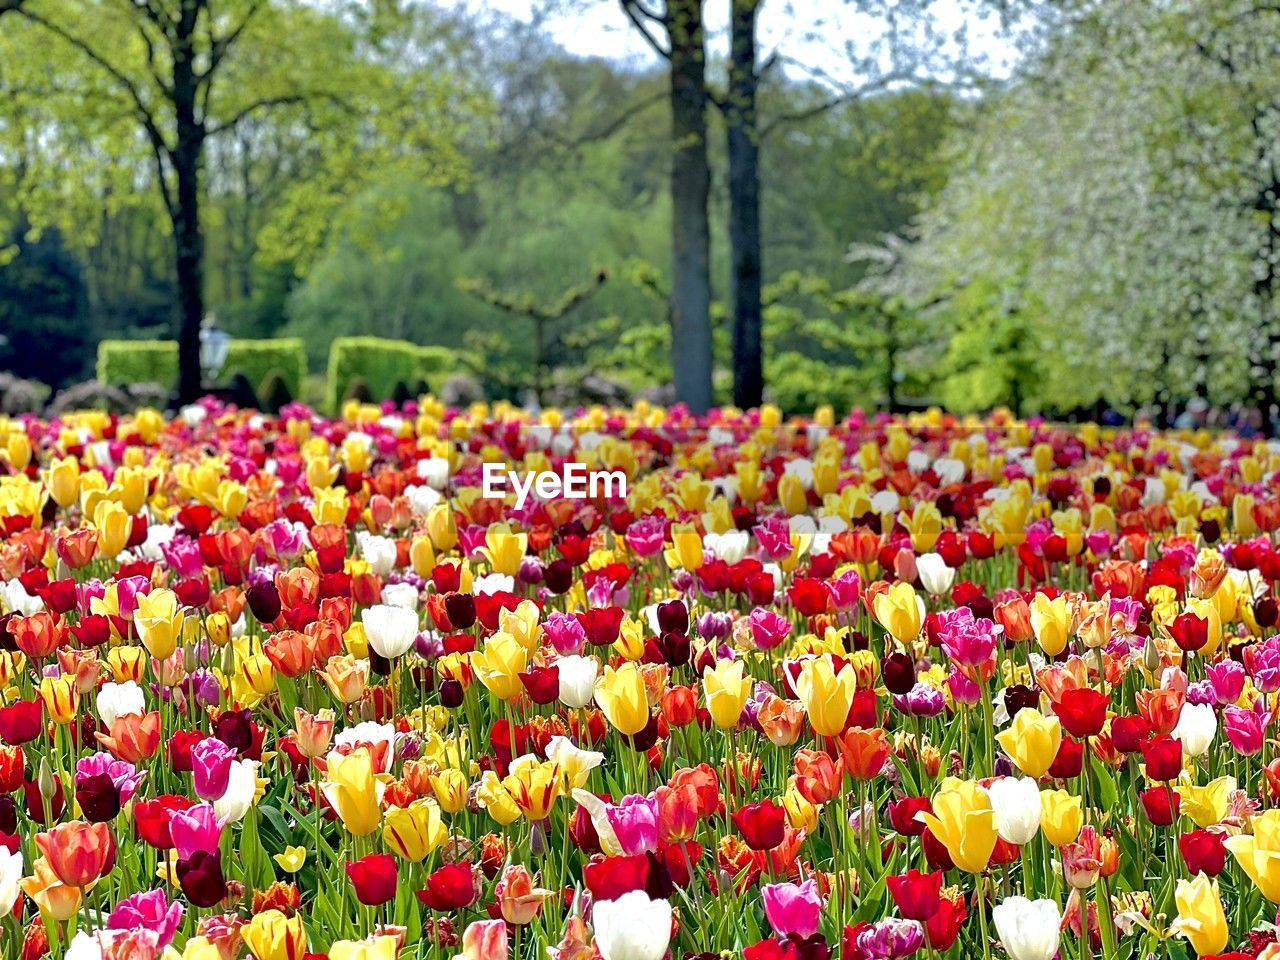 plant, flower, flowering plant, beauty in nature, freshness, growth, nature, tree, tulip, fragility, flowerbed, land, multi colored, springtime, field, no people, day, flower head, abundance, park, tranquility, inflorescence, landscape, yellow, garden, park - man made space, outdoors, botany, scenics - nature, blossom, petal, environment, red, close-up, tranquil scene, pink, focus on foreground, vibrant color, ornamental garden, formal garden, green, sunlight